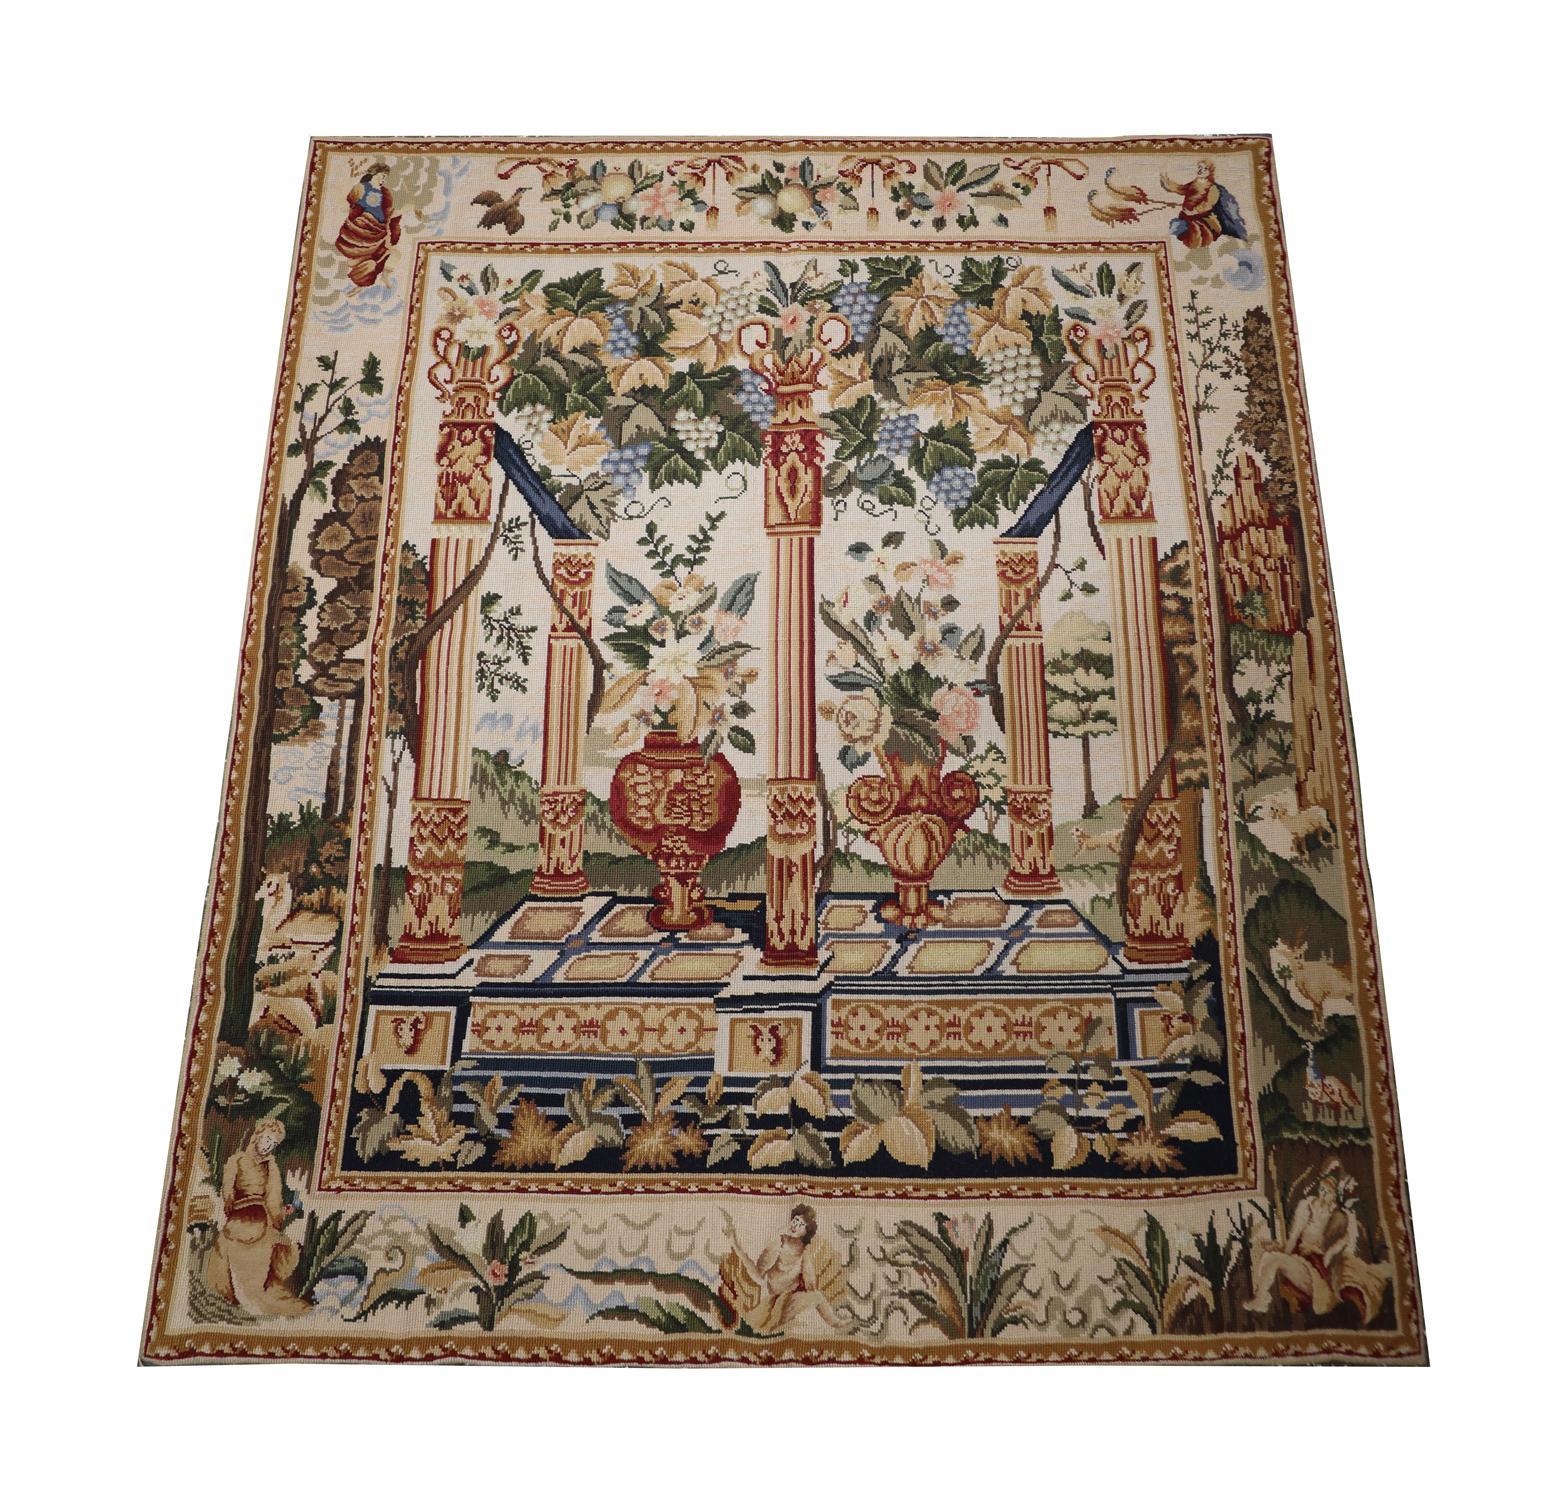 This elegant french style tapestry was woven by hand in china in the early 21st century. The design features vases and pillars that have been decorated with bold floral patterns and grapevines. The design is realistic and catches the eye with its